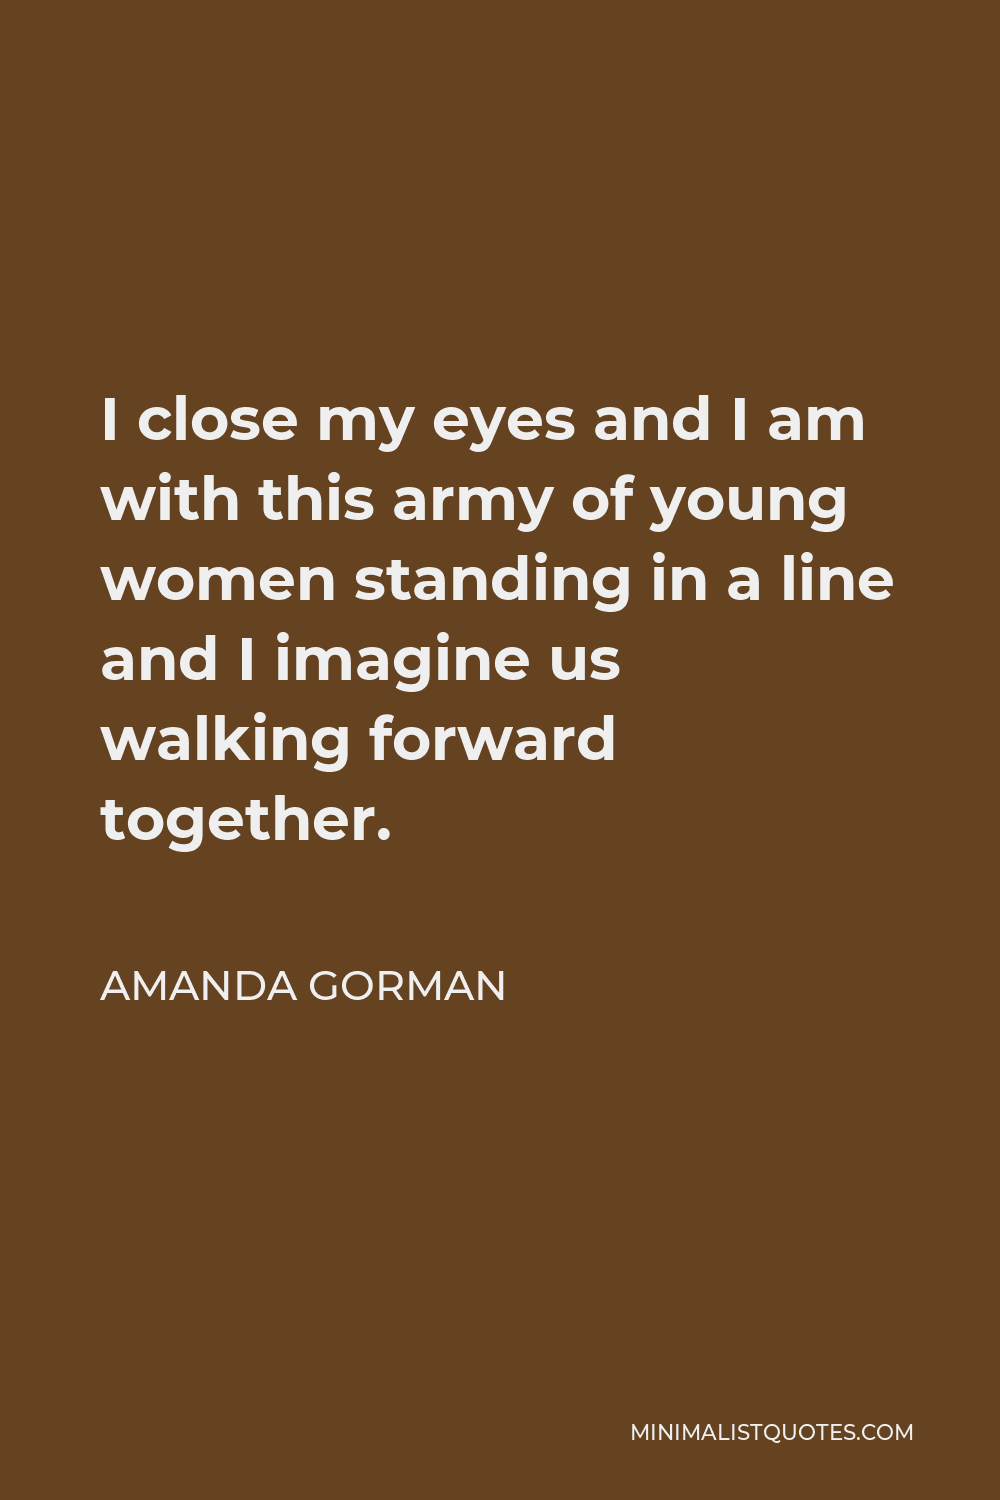 Amanda Gorman Quote - I close my eyes and I am with this army of young women standing in a line and I imagine us walking forward together.